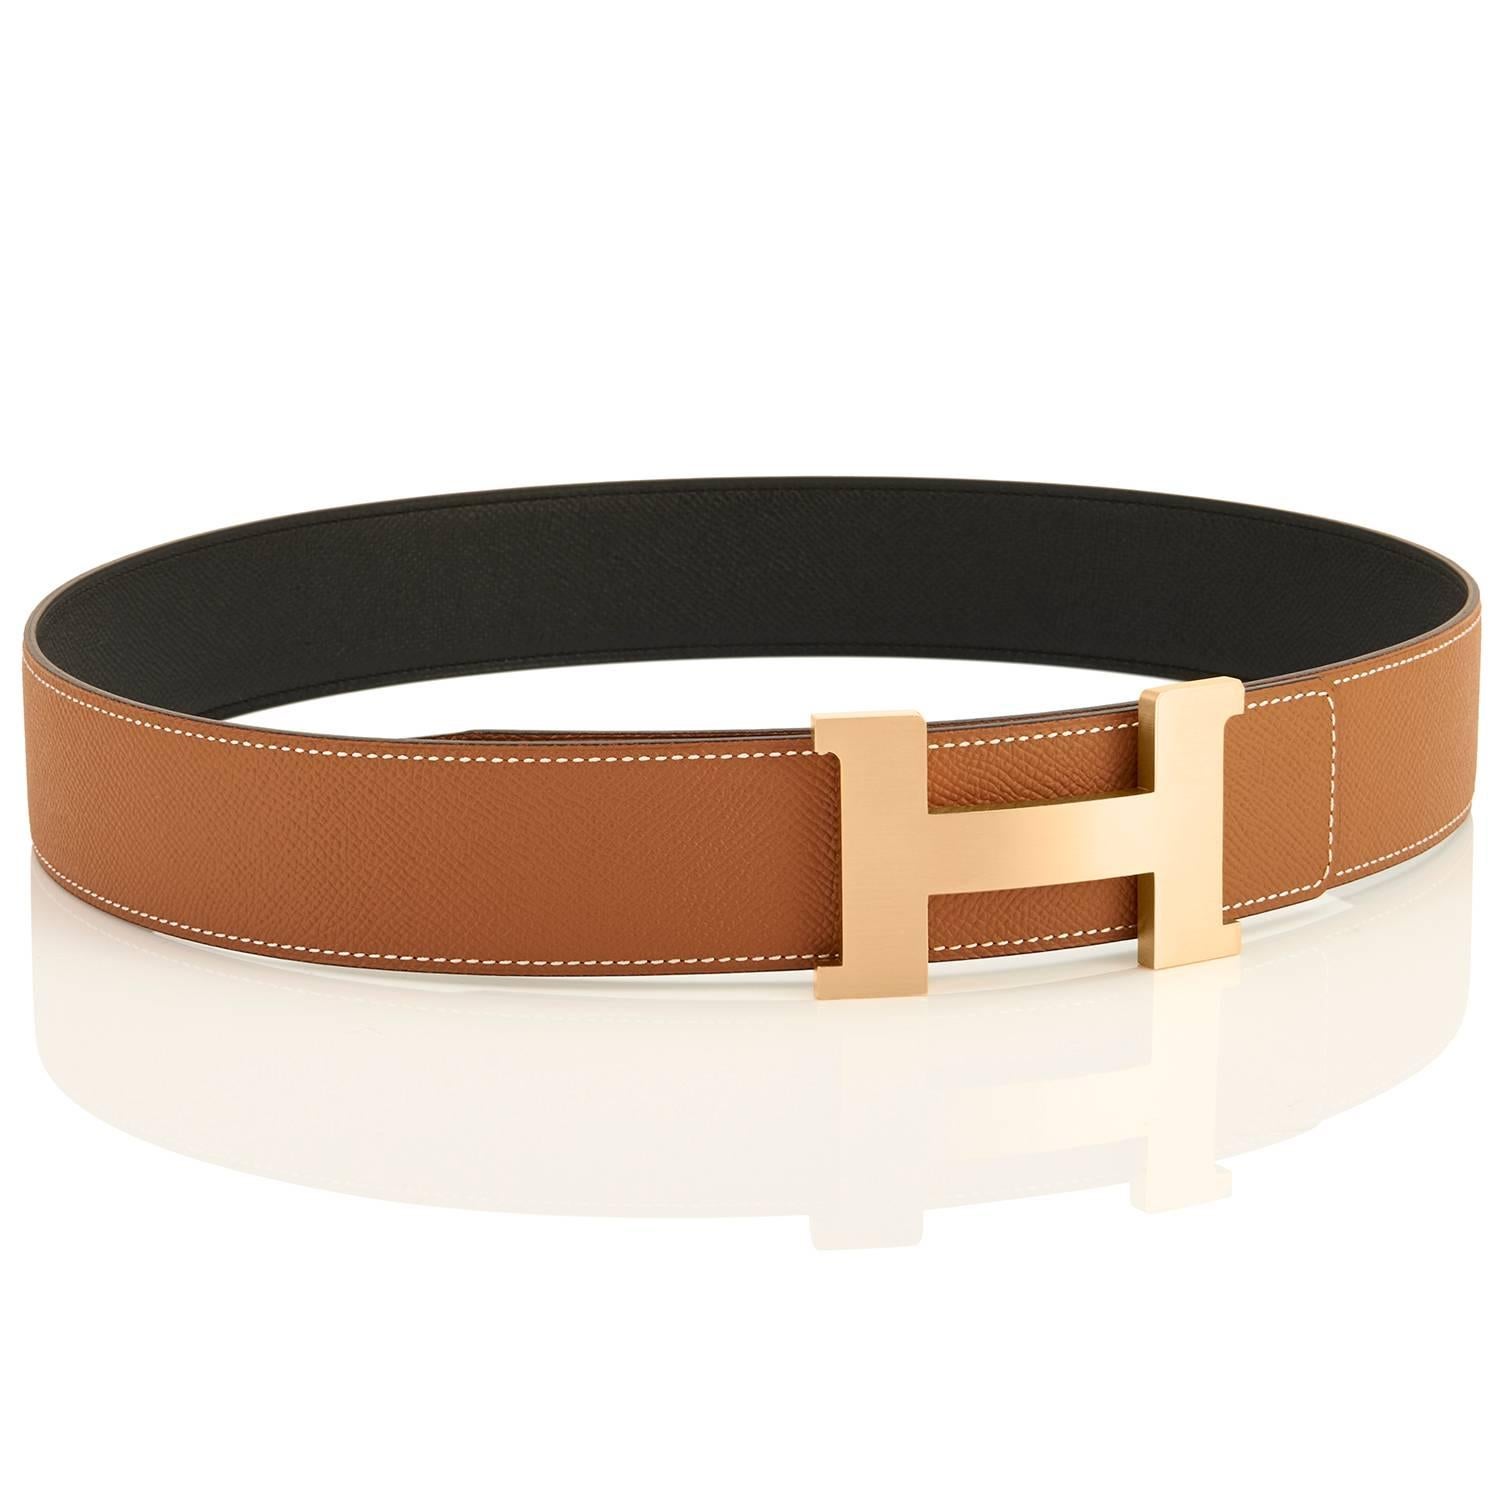 Hermes Reversible Gold Black 90cm Leather Constance Belt Kit Gold Buckle 42mm
Brand New in Box. Store Fresh. Pristine Condition.
Perfect gift! Belt kit comes with reversible belt strap, Hermes dust bag for belt buckle, and Hermes box
Black on one